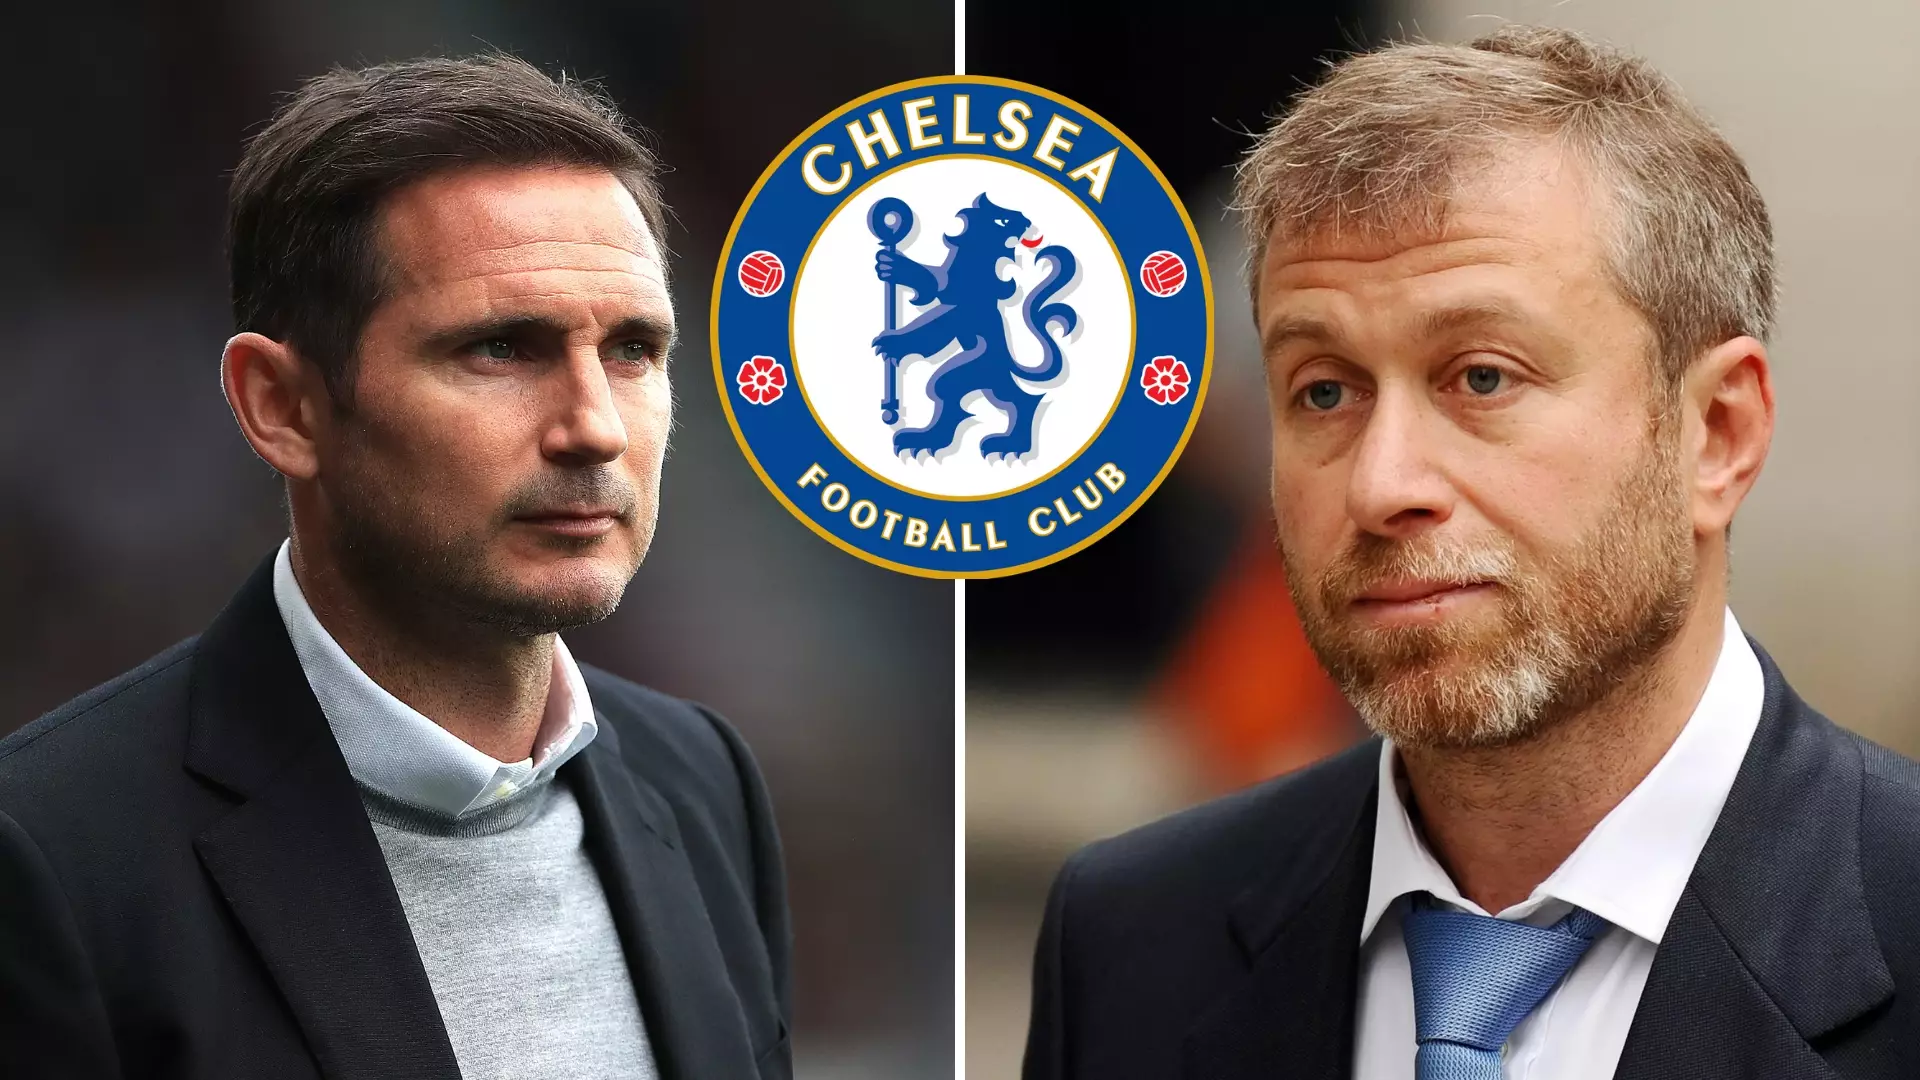 Chelsea Boss Frank Lampard Becomes Early Frontrunner For Next Premier League Manager To Be Sacked